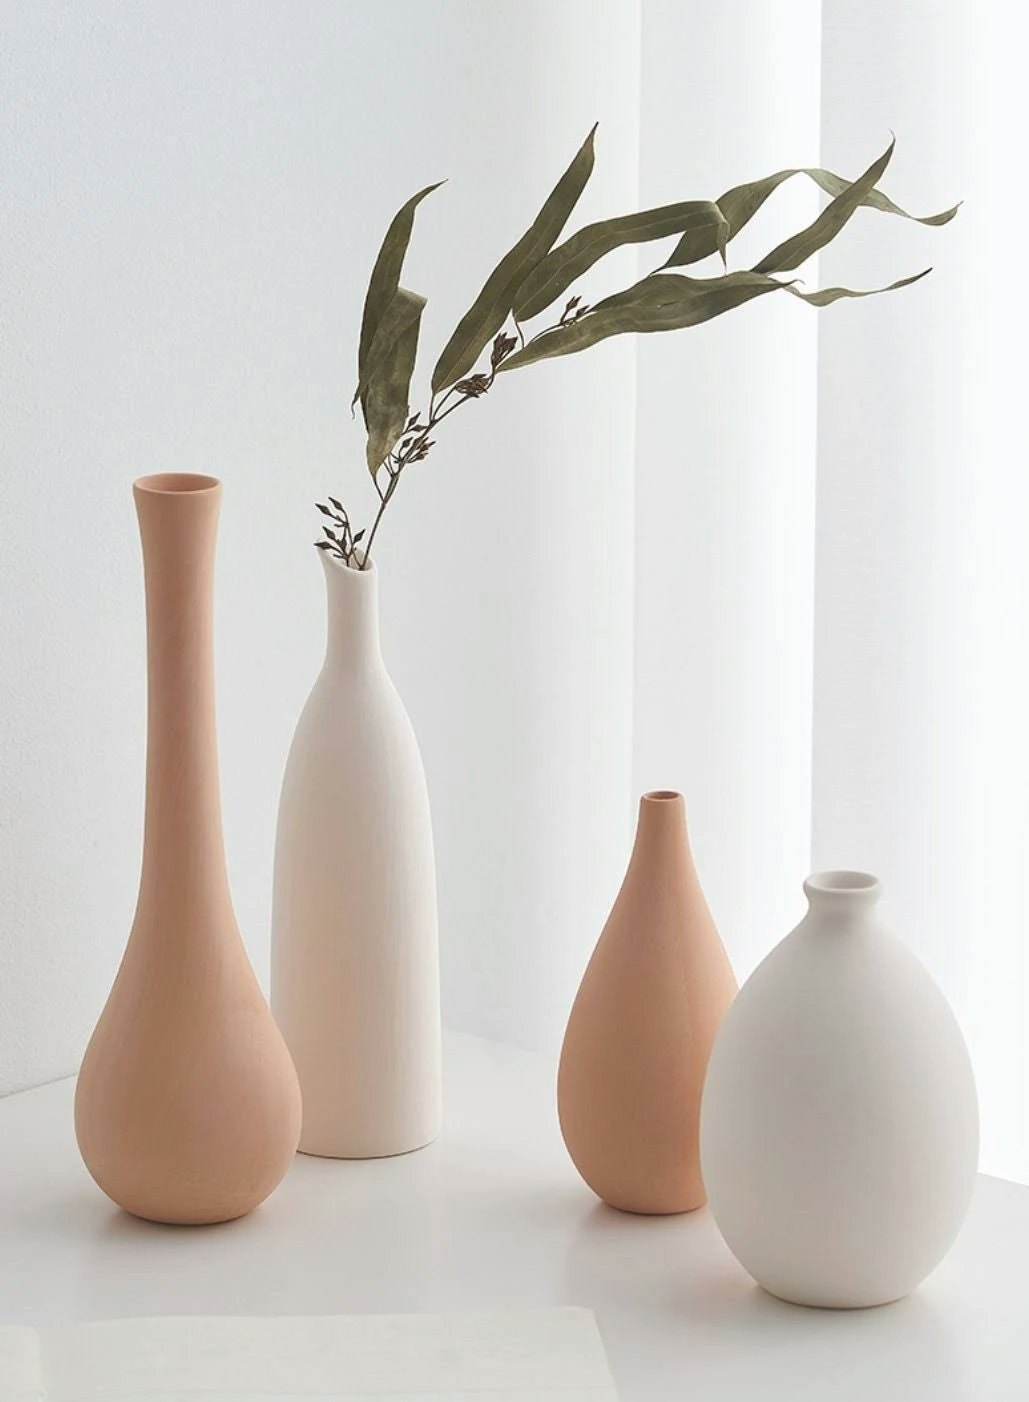 Vases with gumnut leaves 